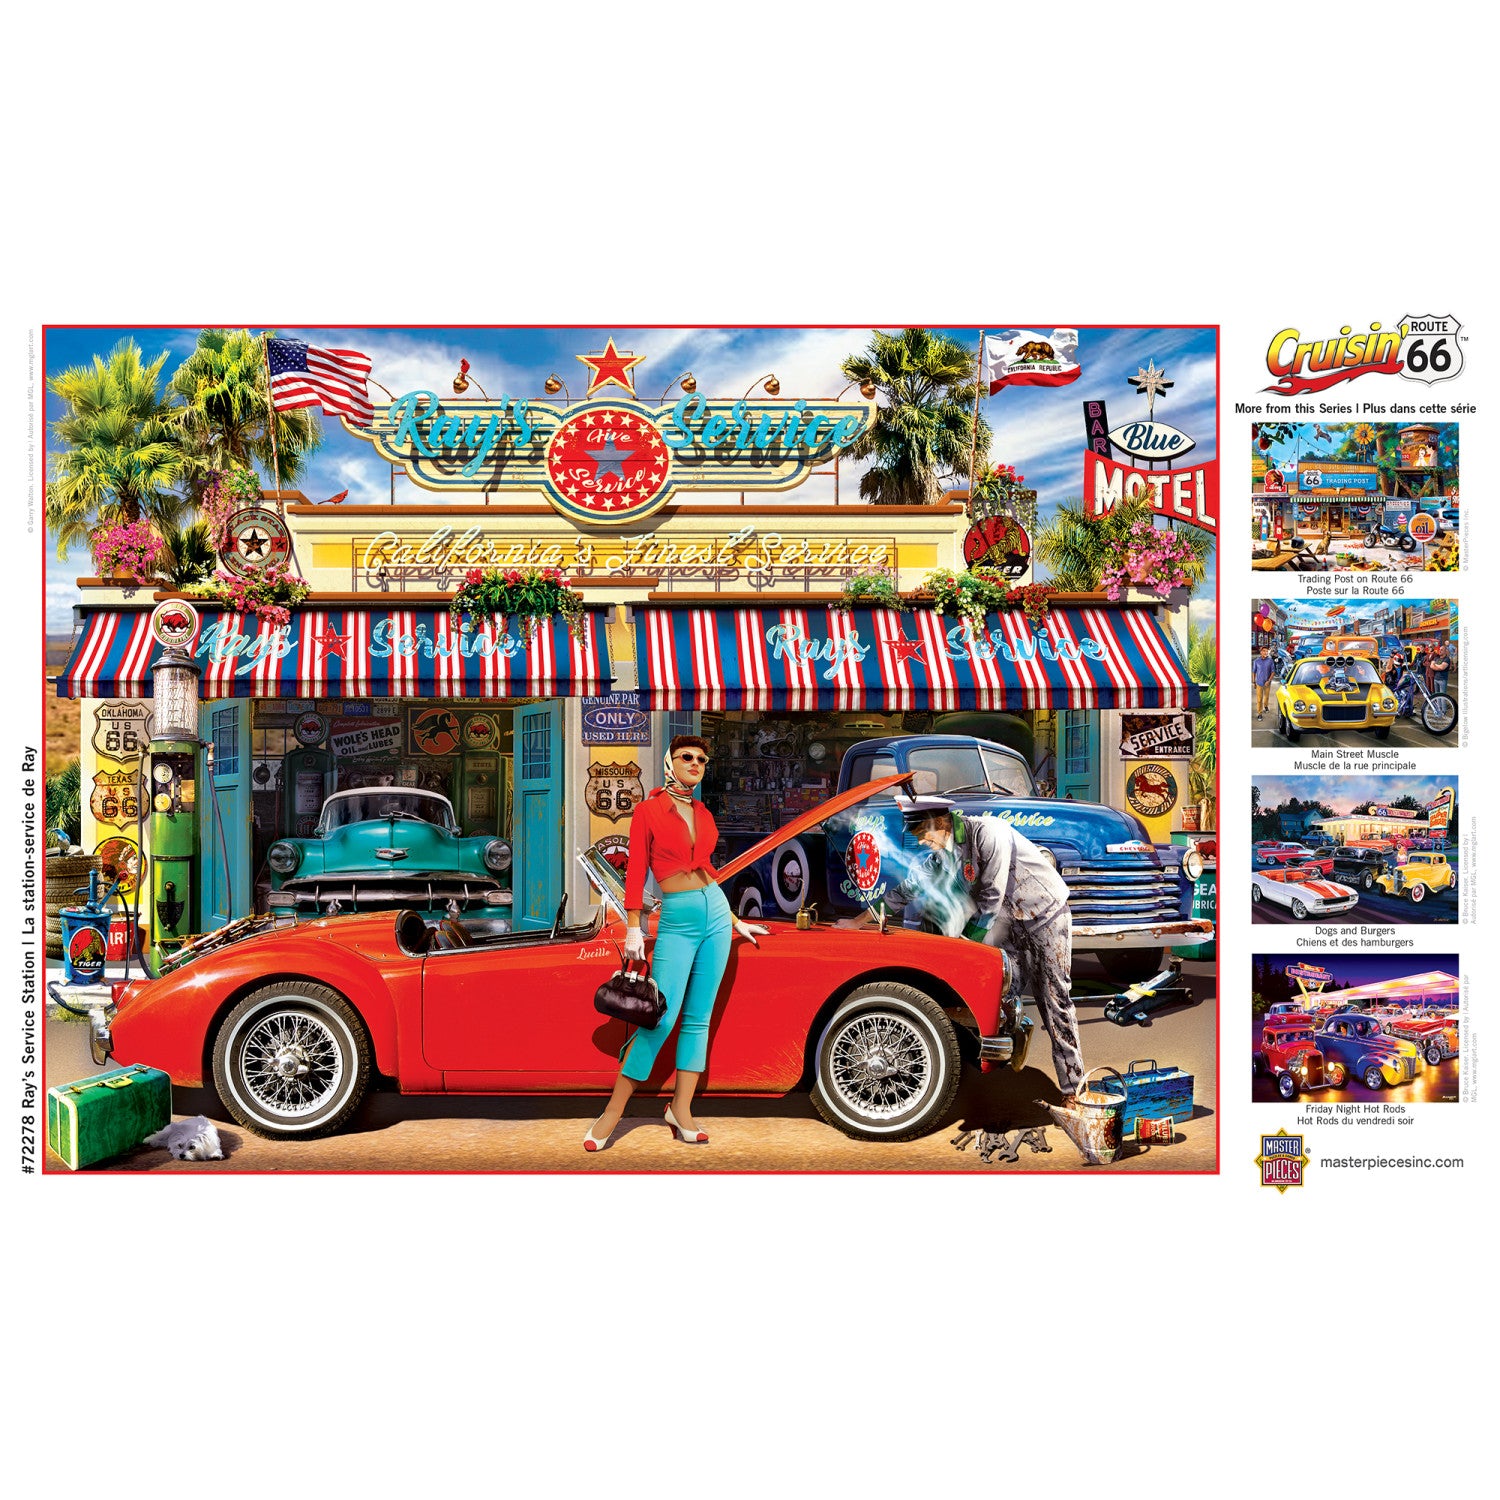 Cruisin' Route 66 - Ray's Service Station 1000 Piece Jigsaw Puzzle